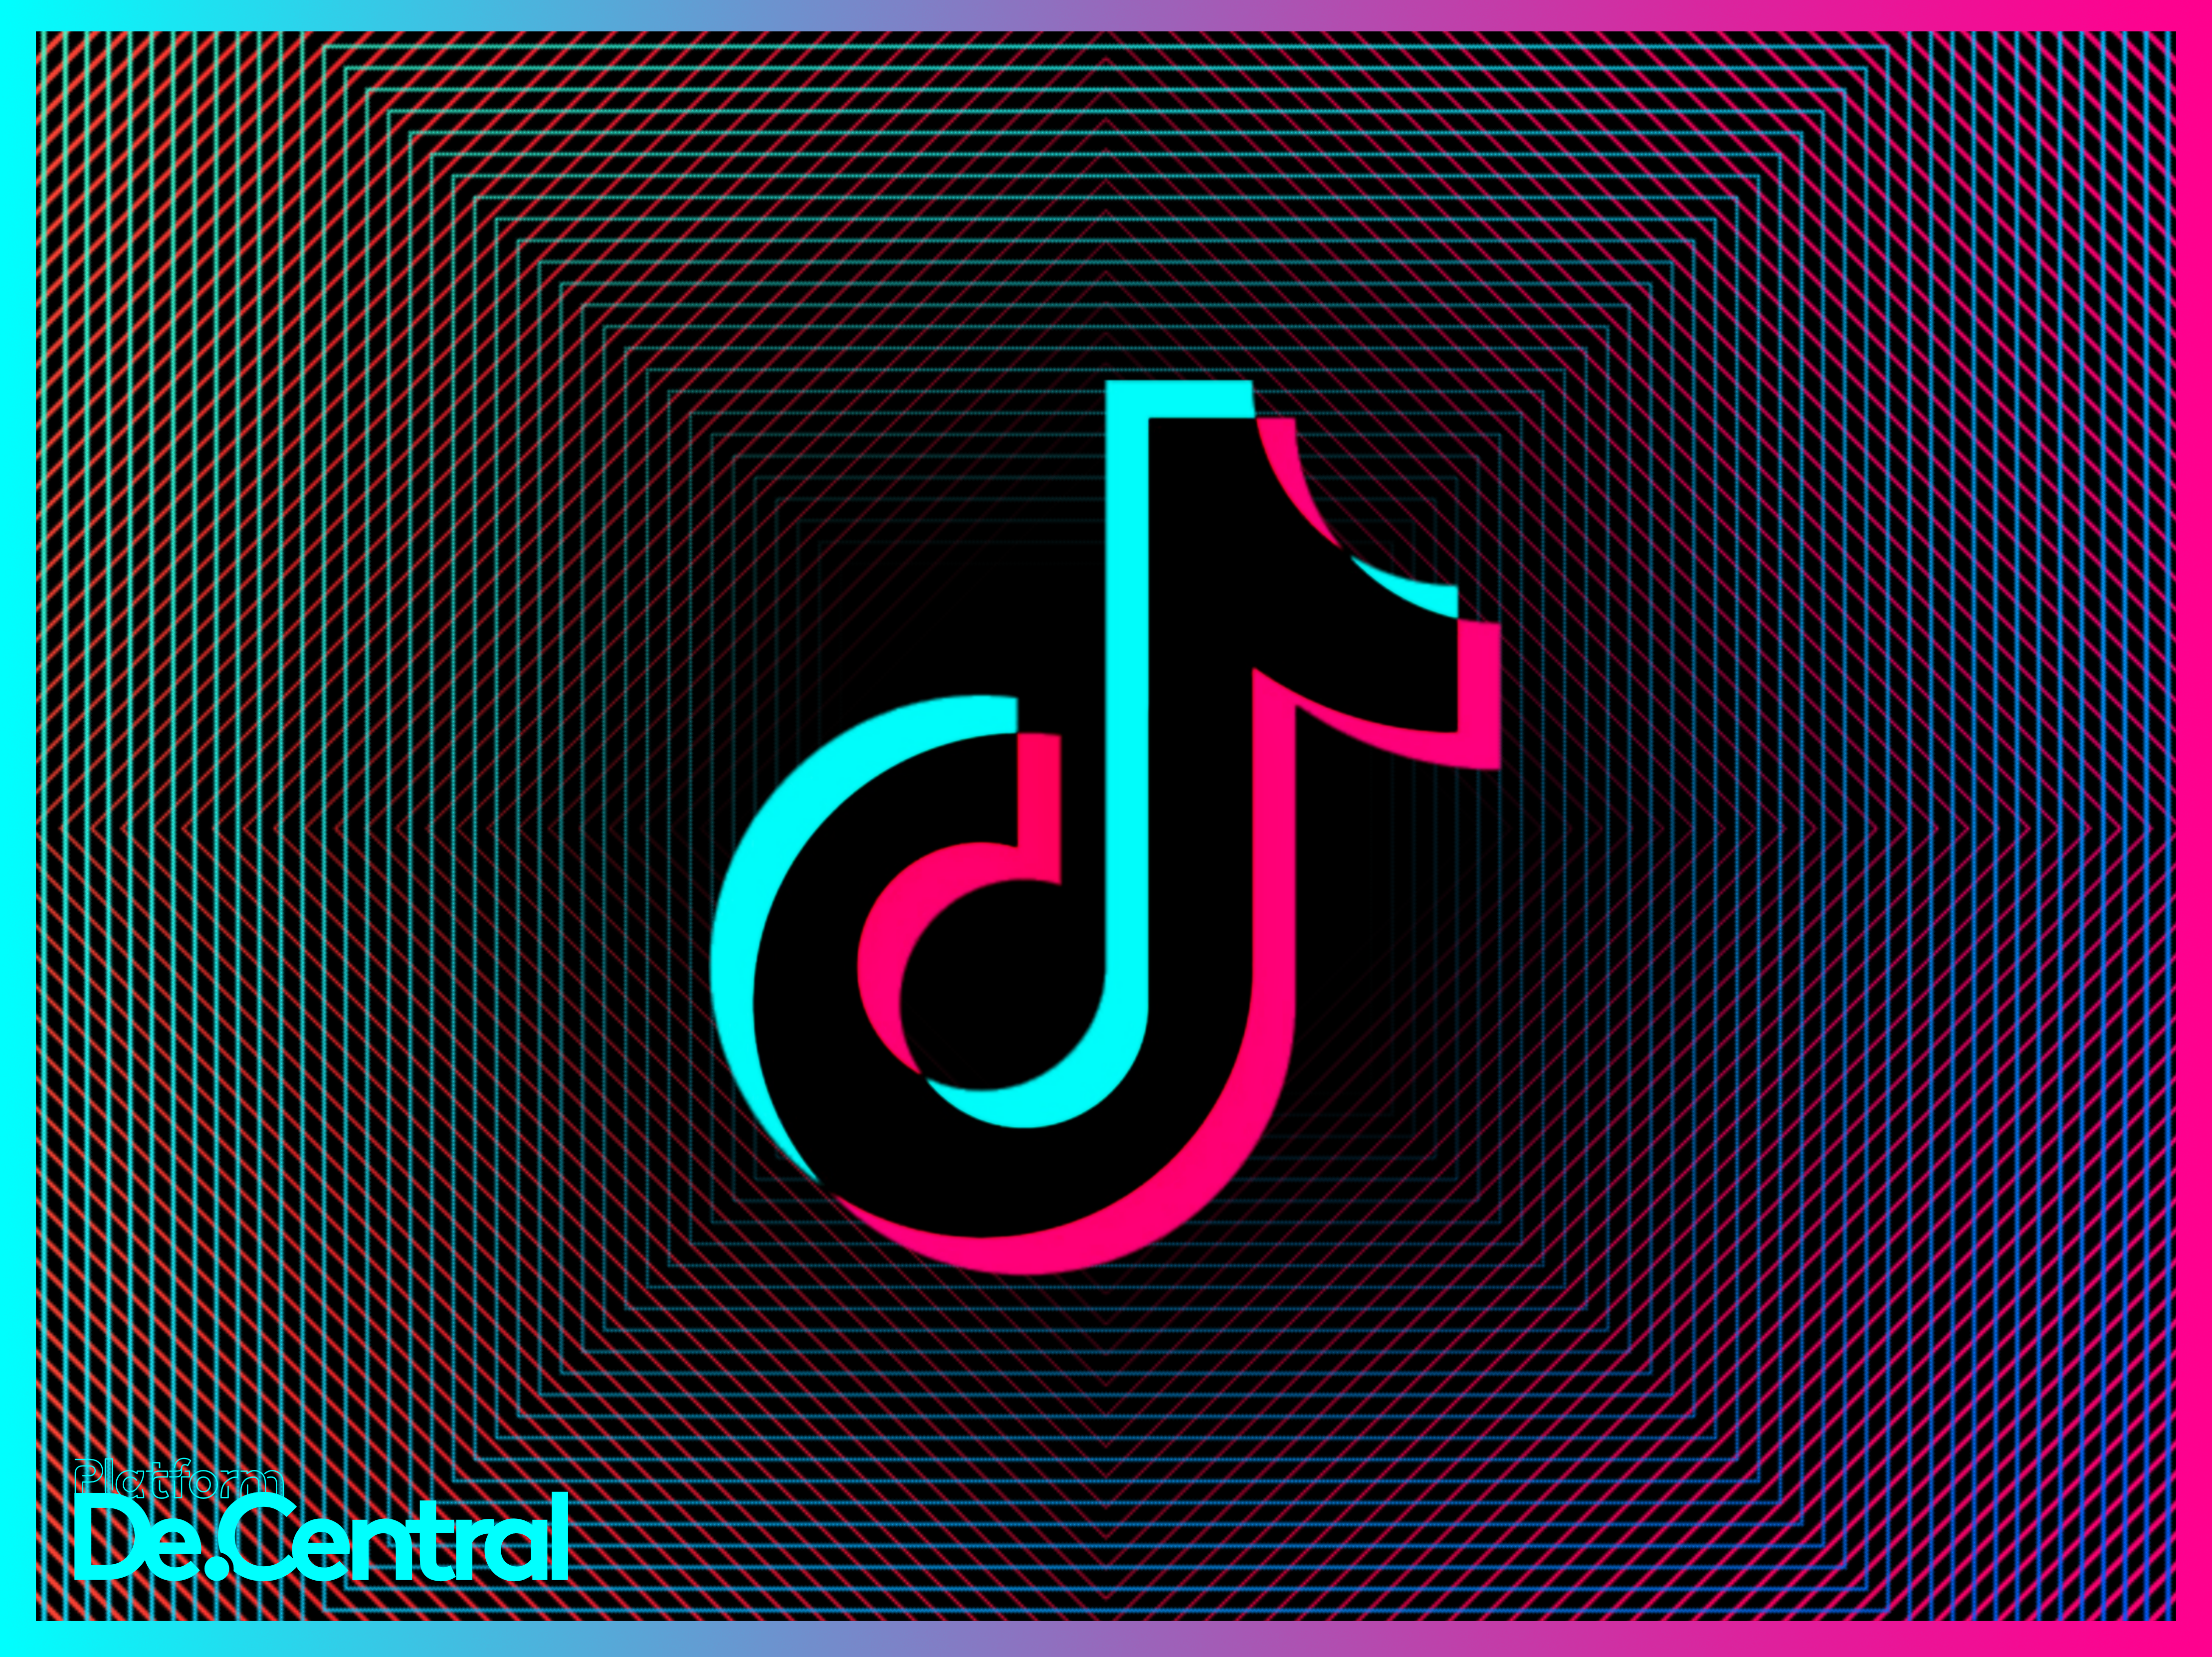 Microsoft may acquire entire TikTok business from ByteDance